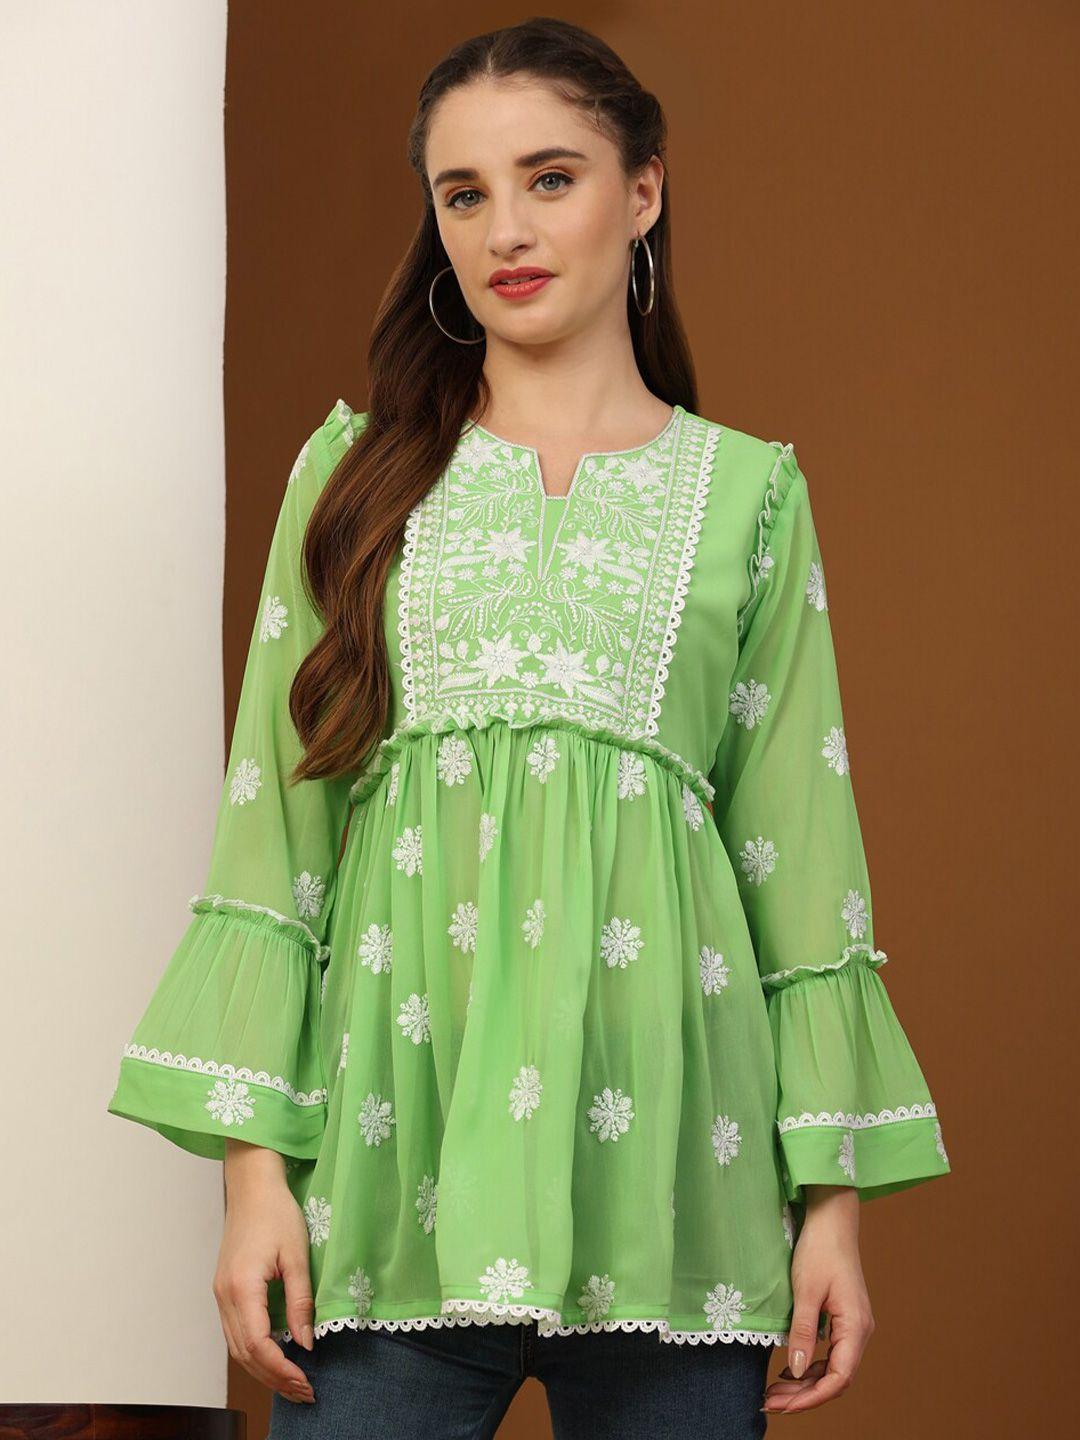 growish-green-embroidered-georgette-top